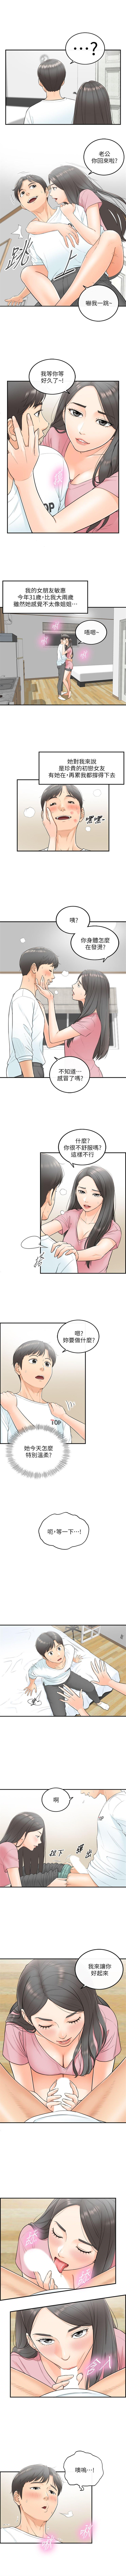 Playing 正妹小主管 1-52 官方中文（連載中） Tgirl - Page 5